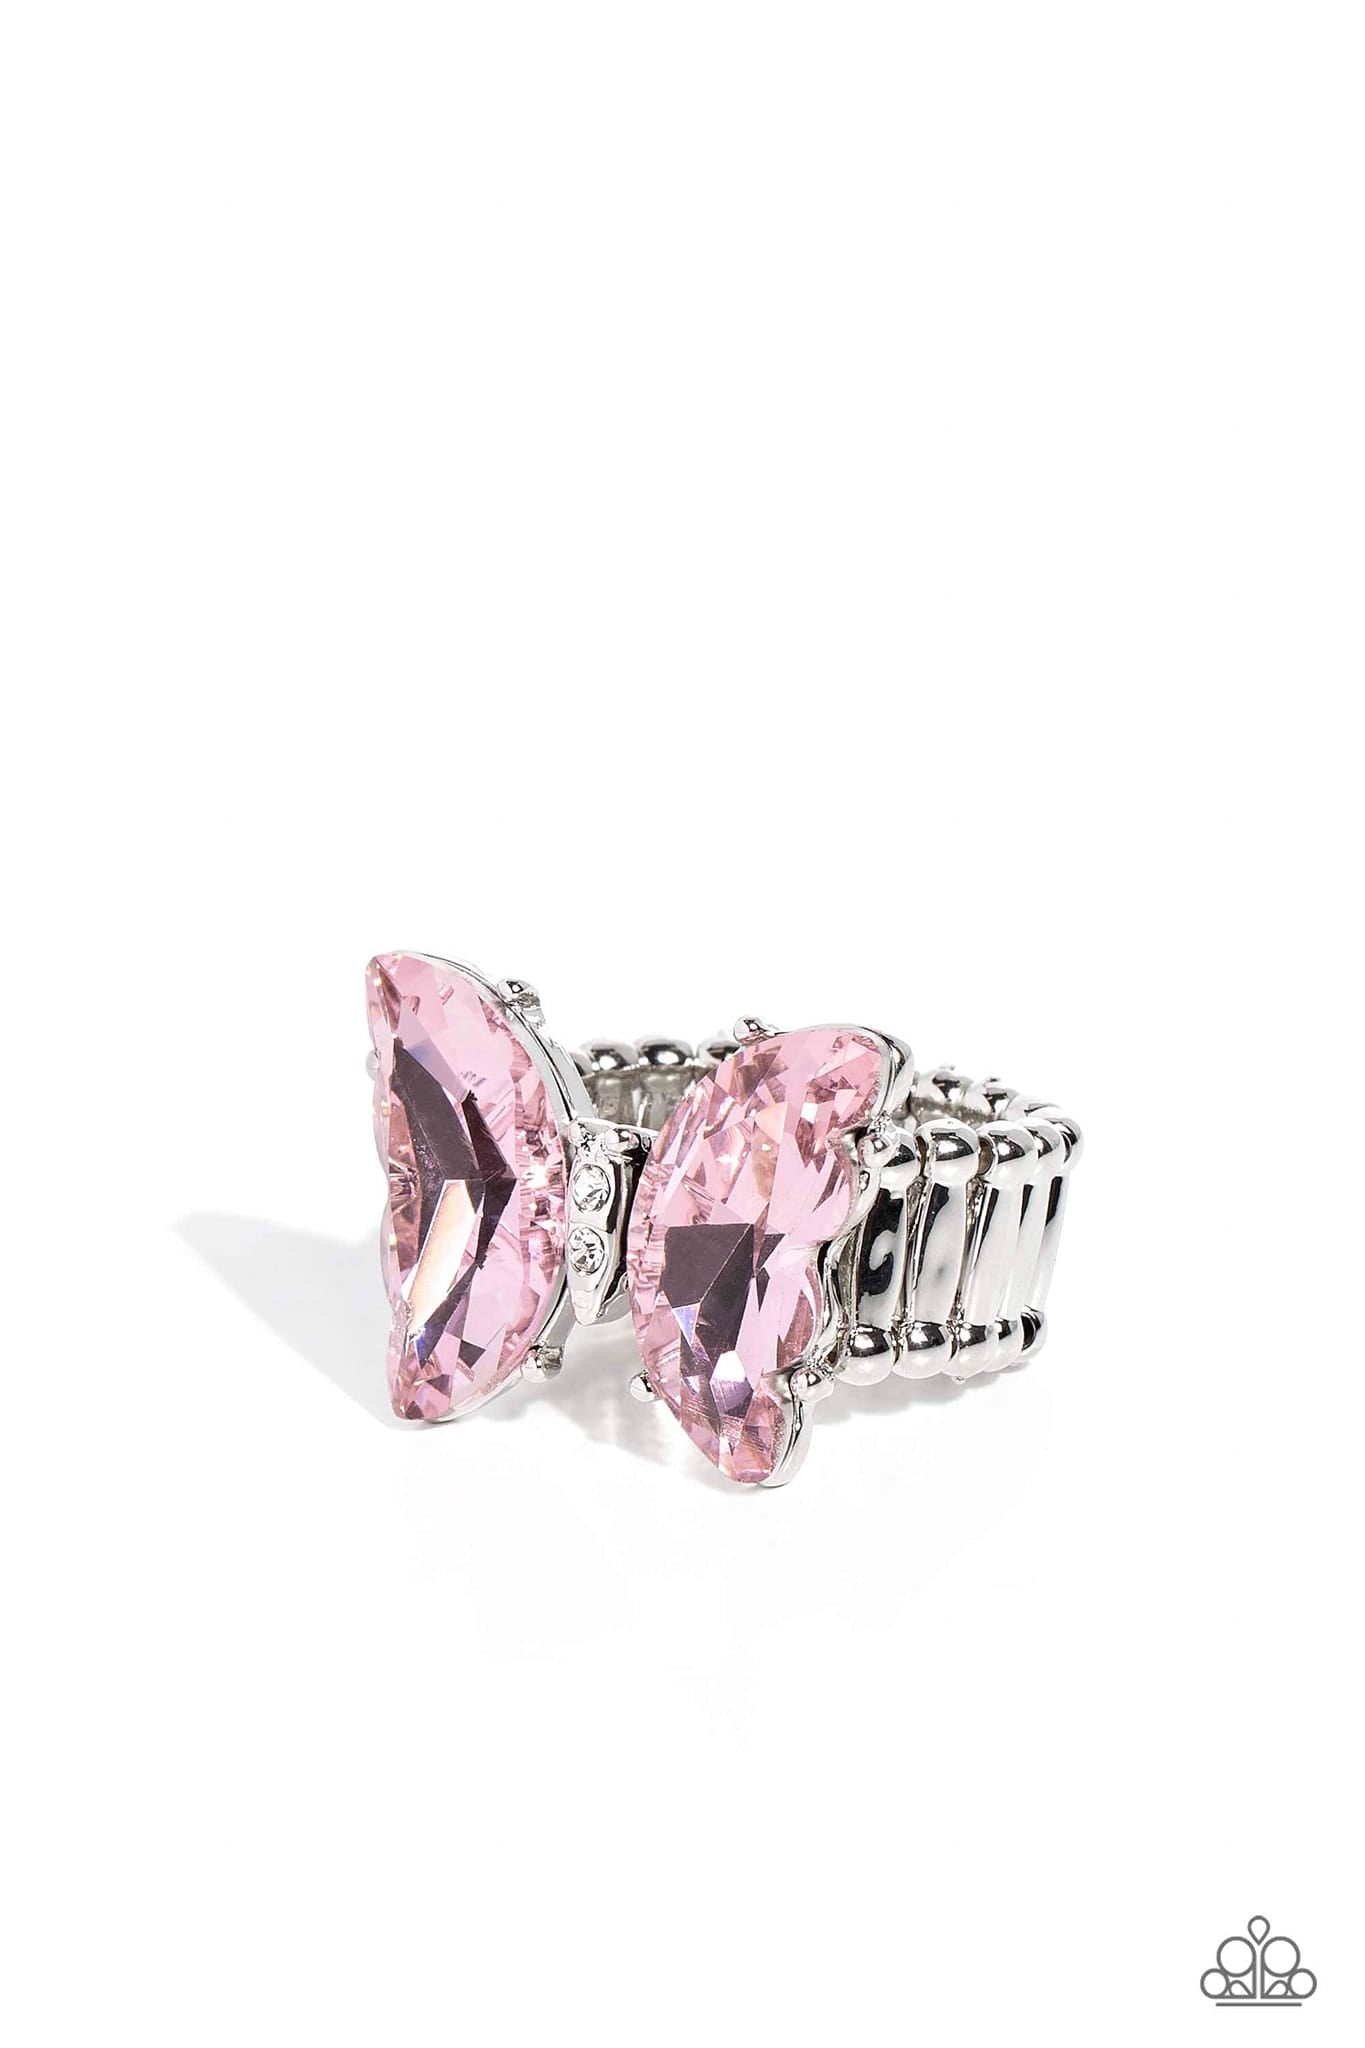 Lazy Afternoon - pink - Paparazzi ring